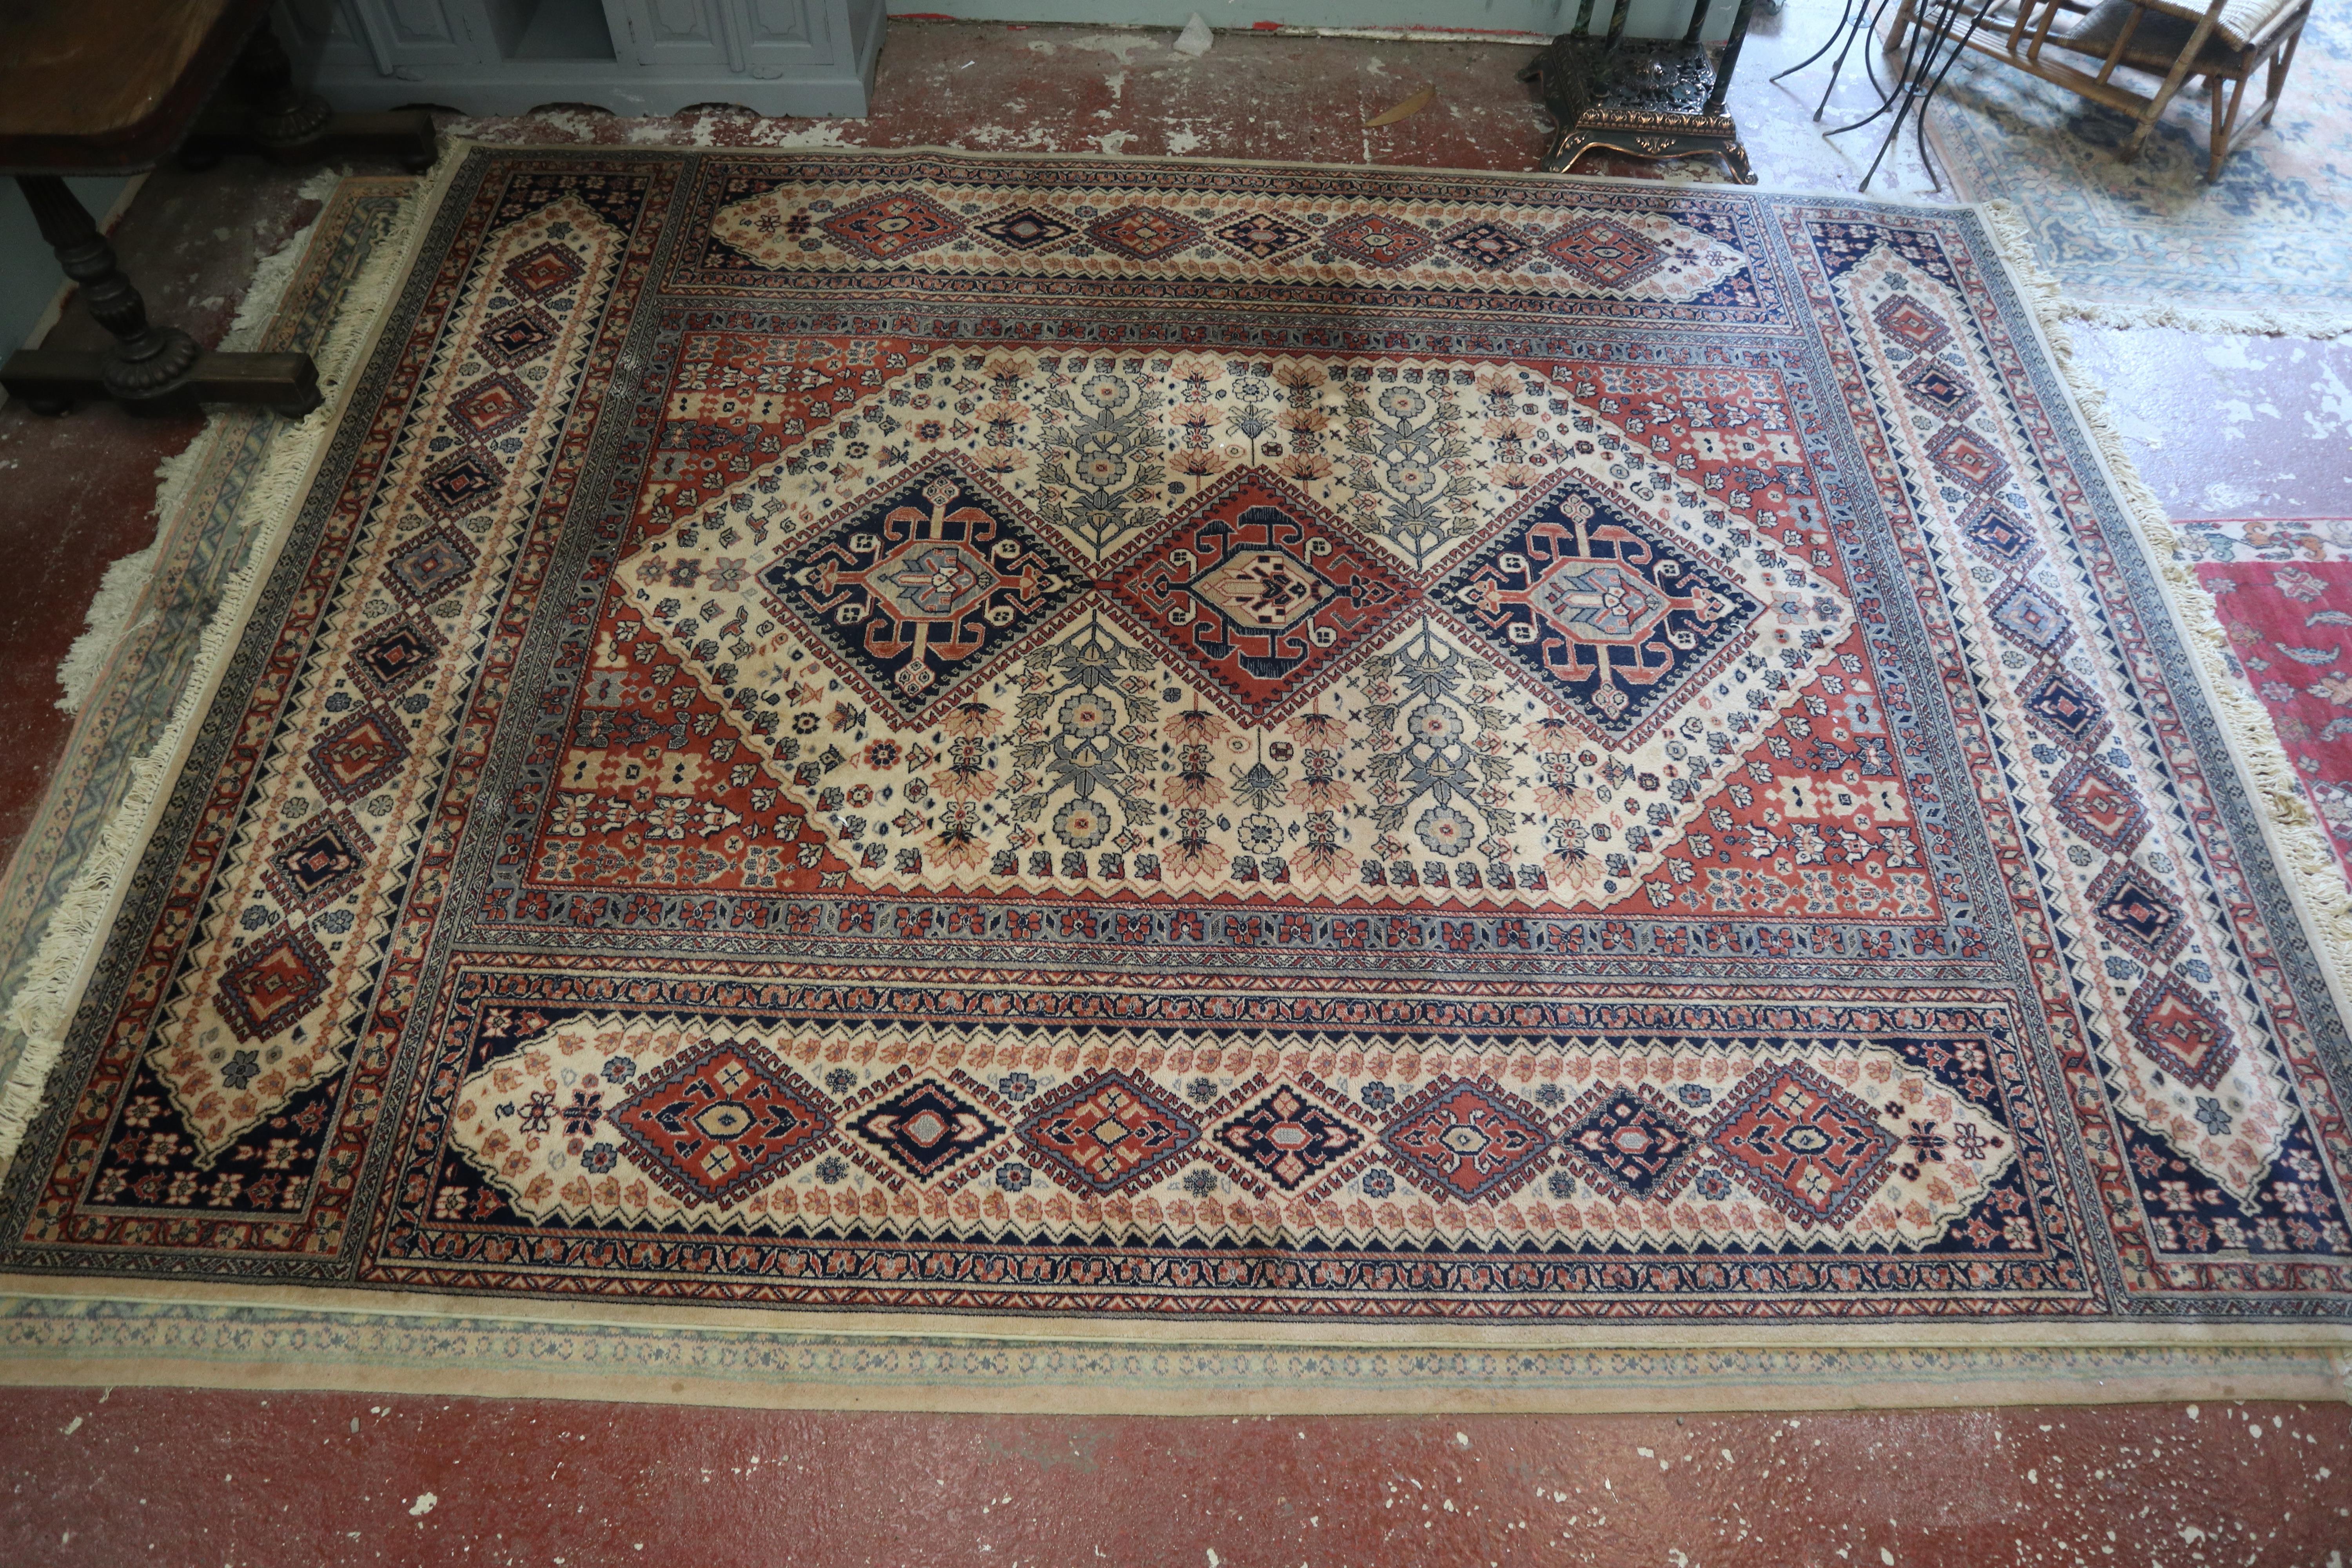 Large hand knotted patterned rug - Approx size: 370cm x 275cm - Image 2 of 3